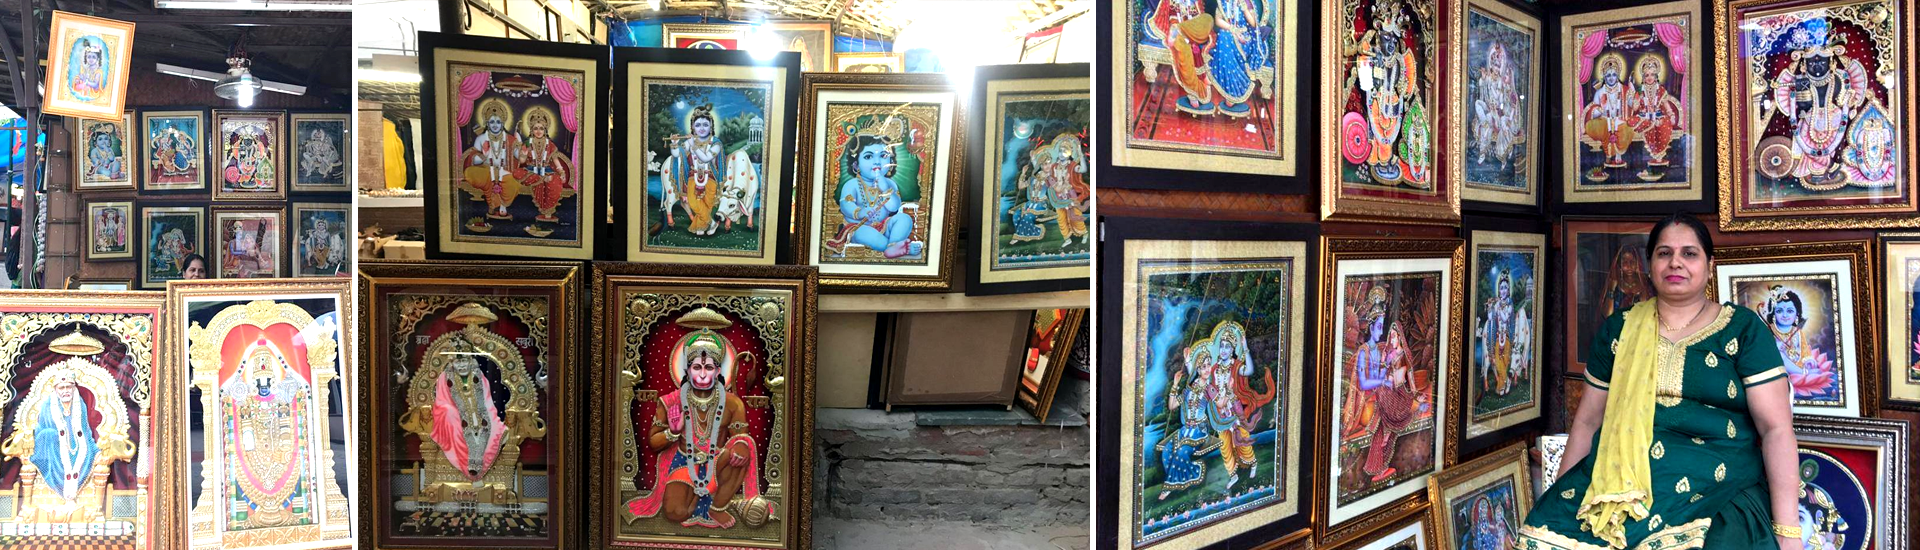 Tanjore Painting Gallery